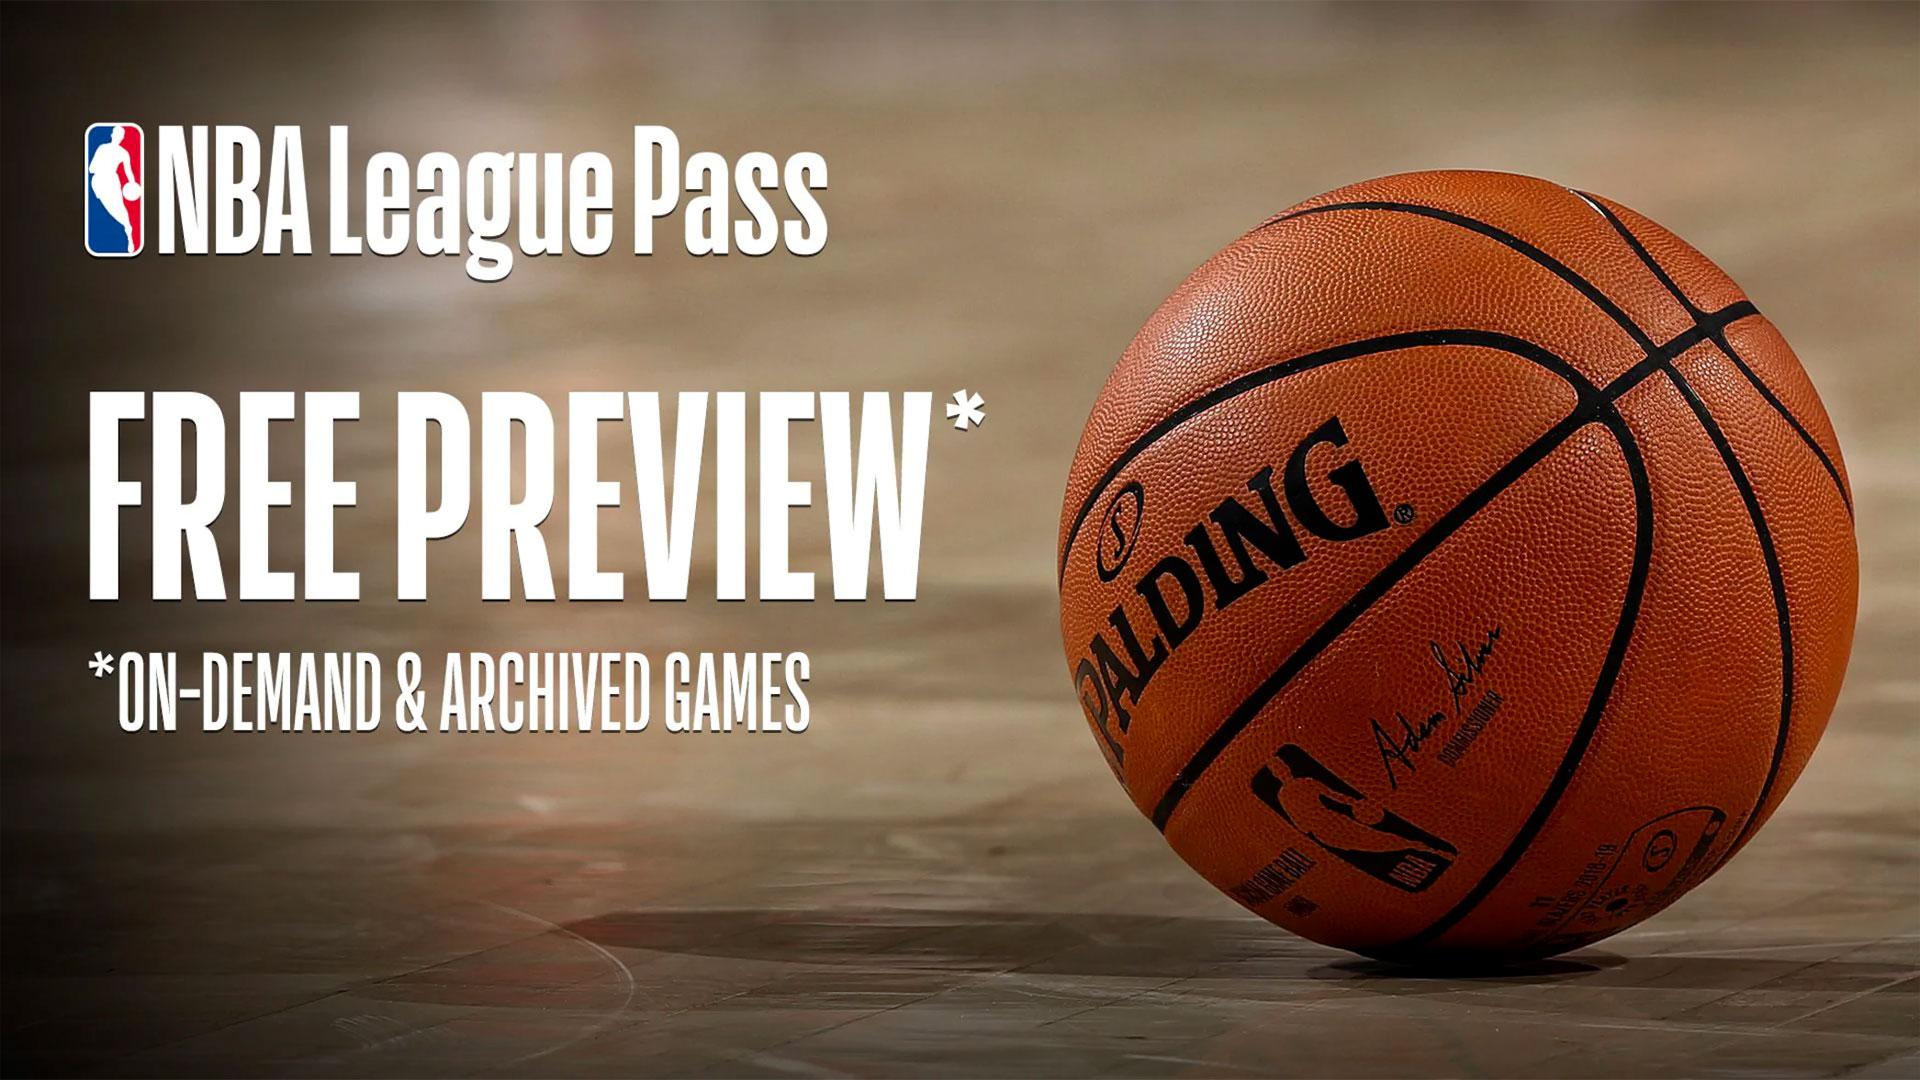 Catch up on previous NBA games and more with this FREE preview of League Pass